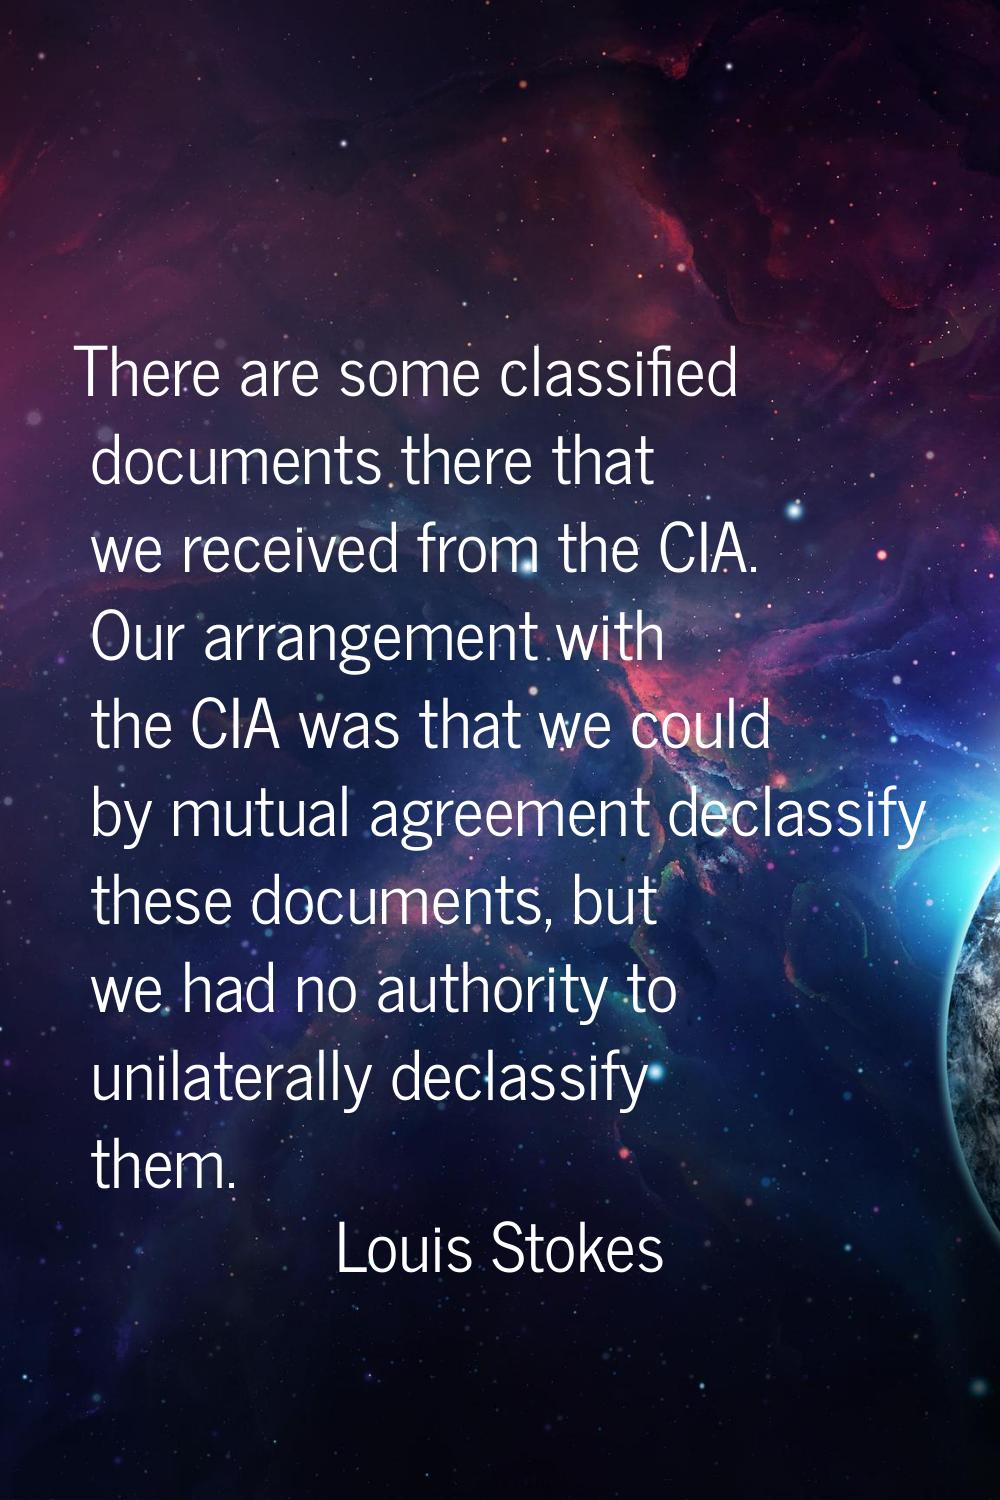 There are some classified documents there that we received from the CIA. Our arrangement with the C